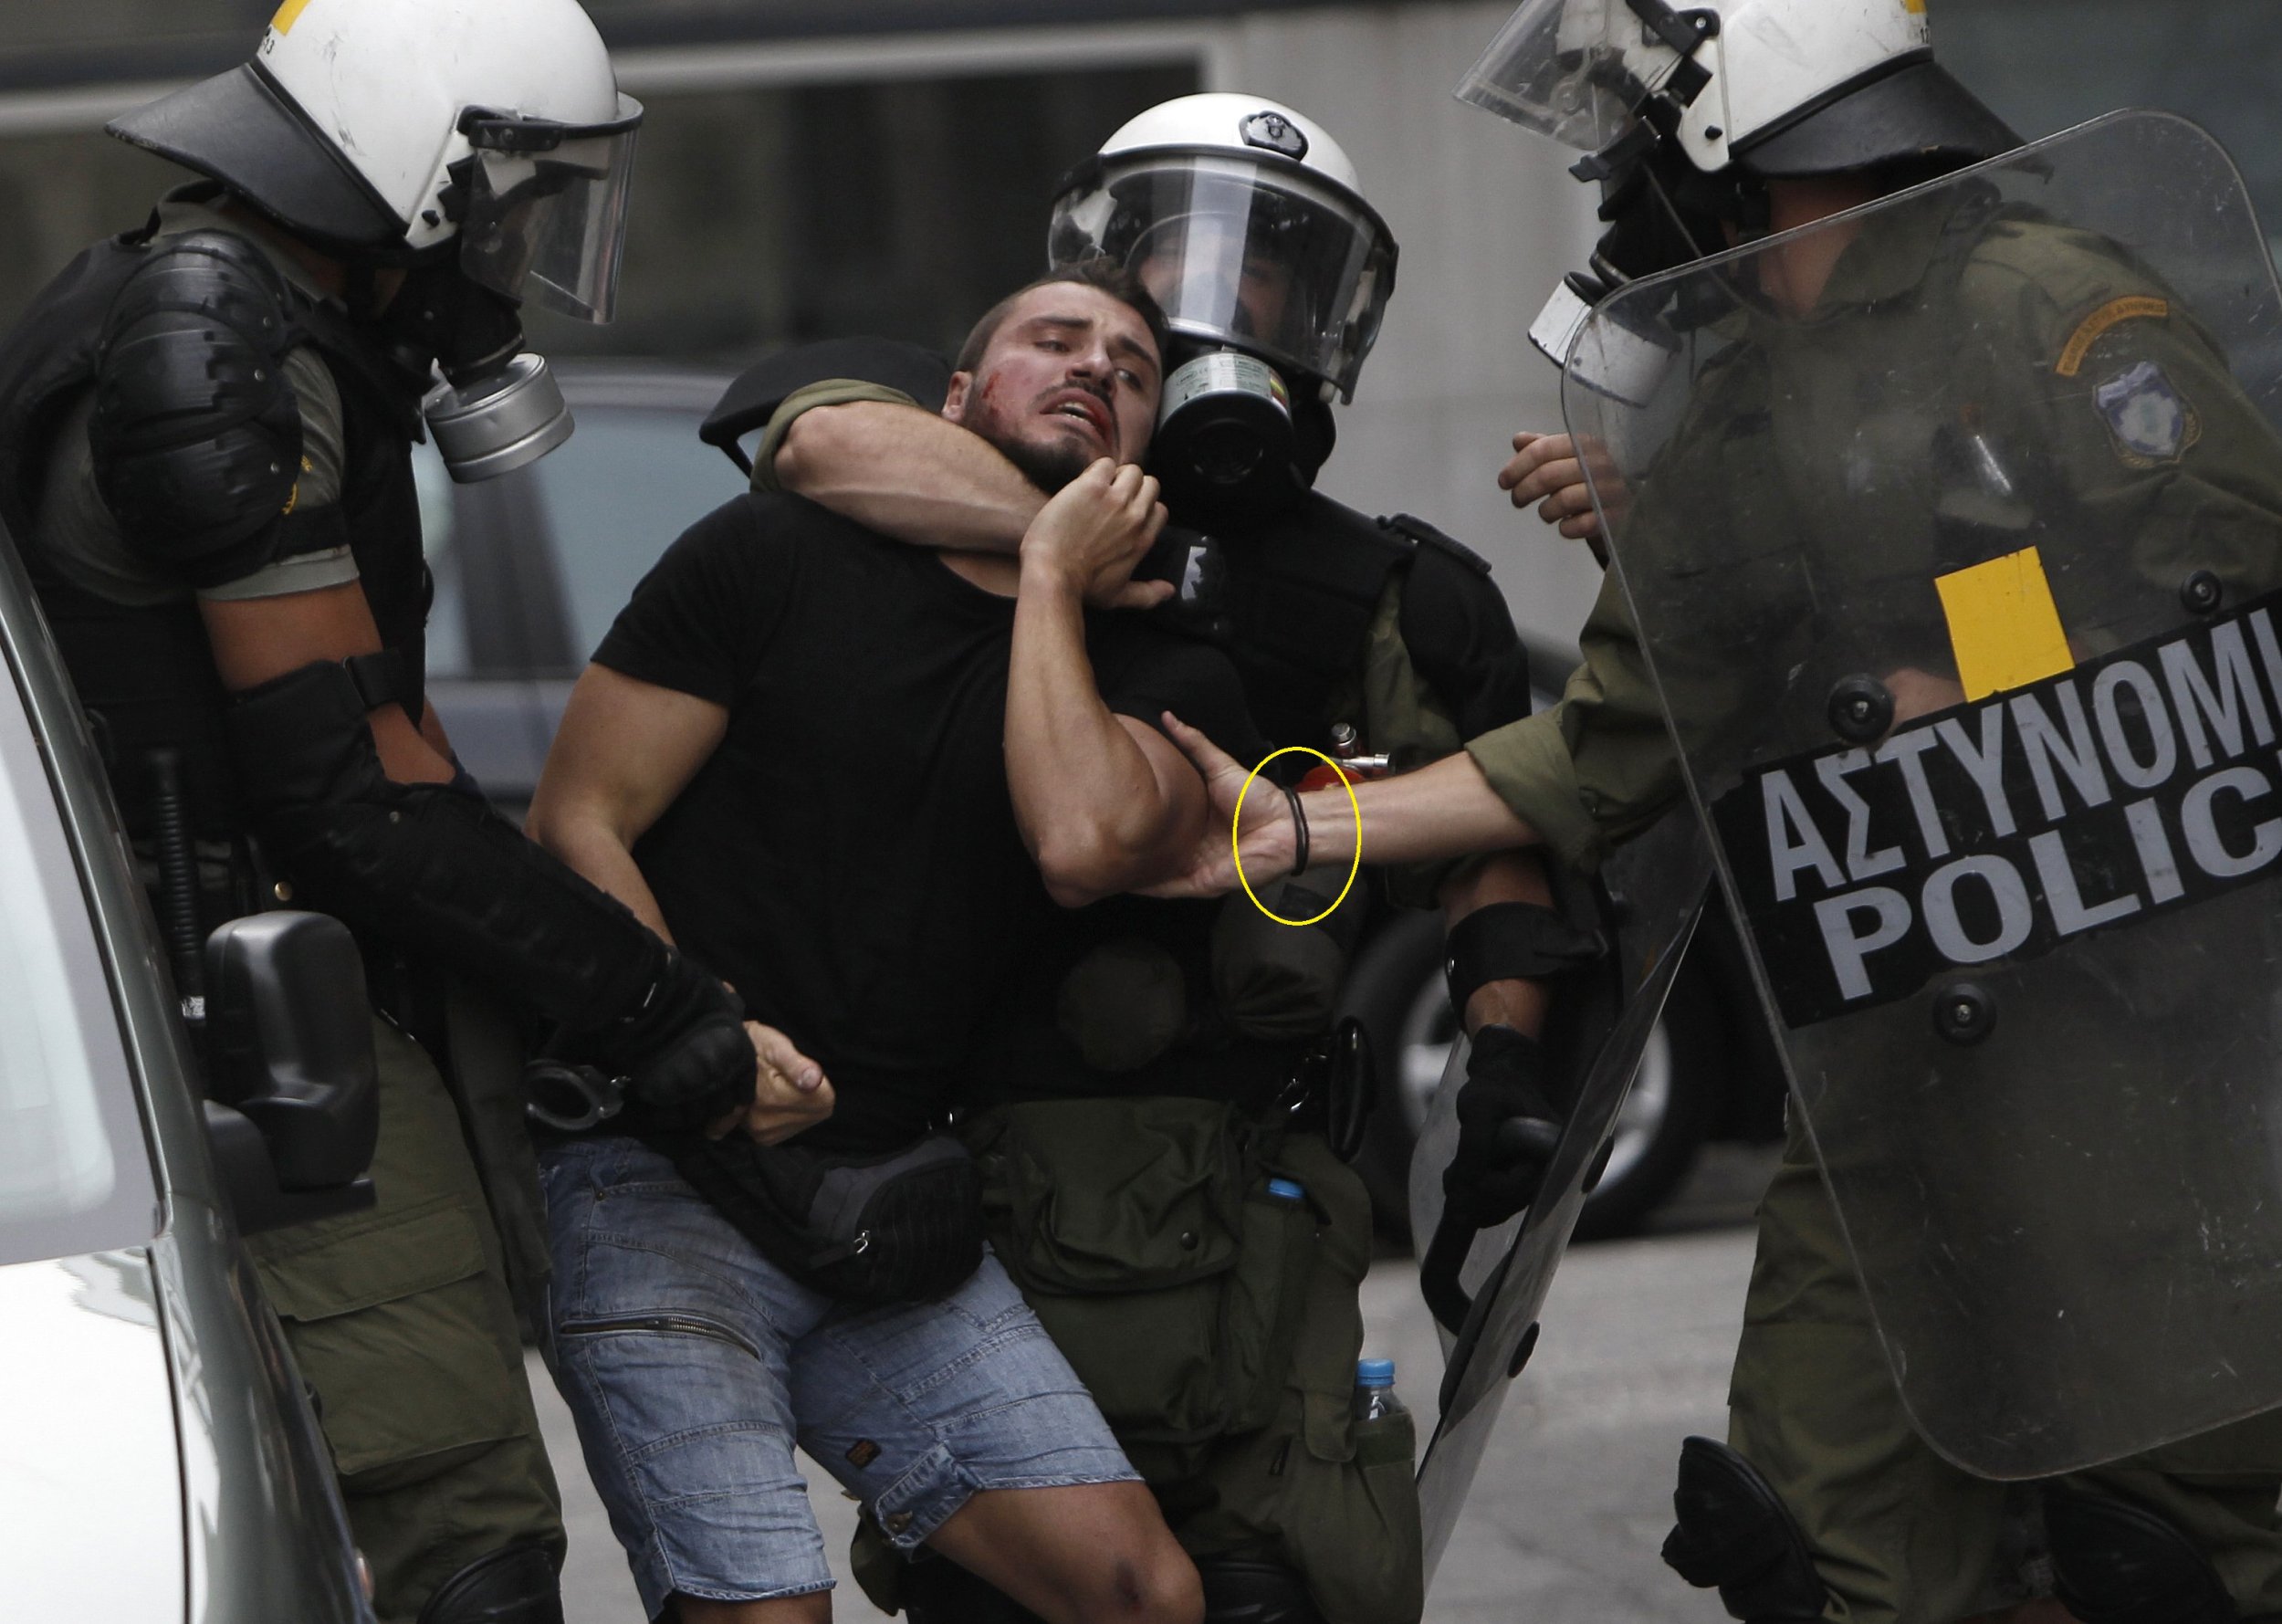 A protester is arrested during demonstrations in Athens in October 9.